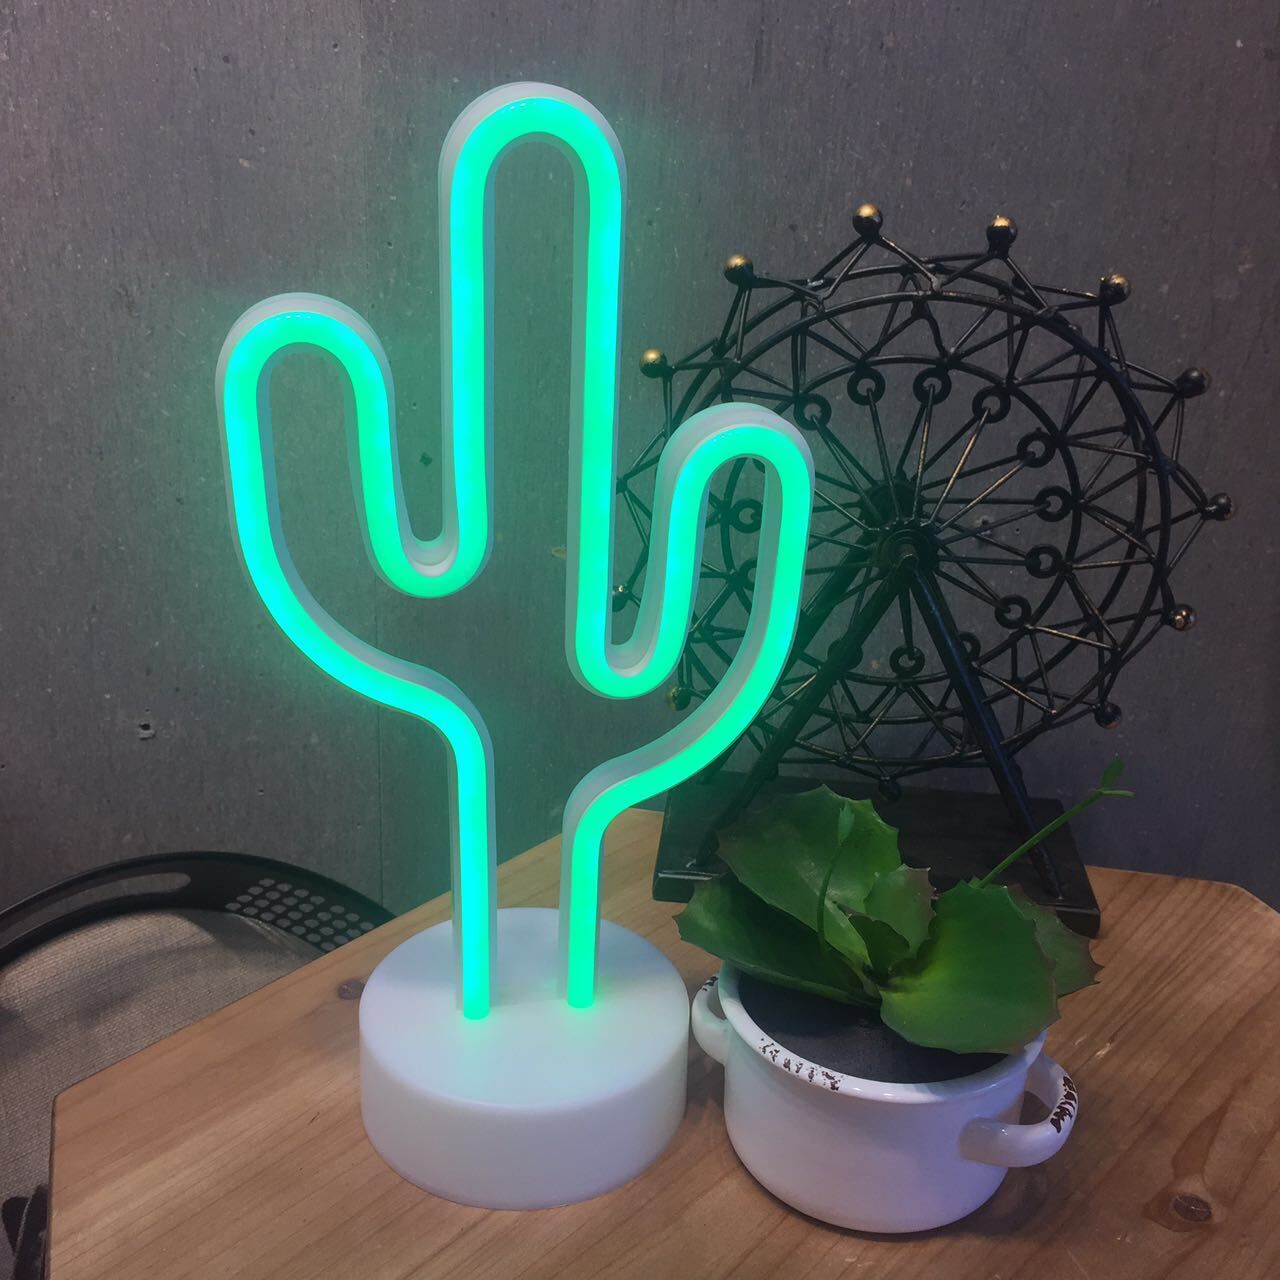 Cactus Neon Sign | Cactus Neon Signs LED Neon Light Sign with Holder Base for Party Supplies Neon Table Lamp